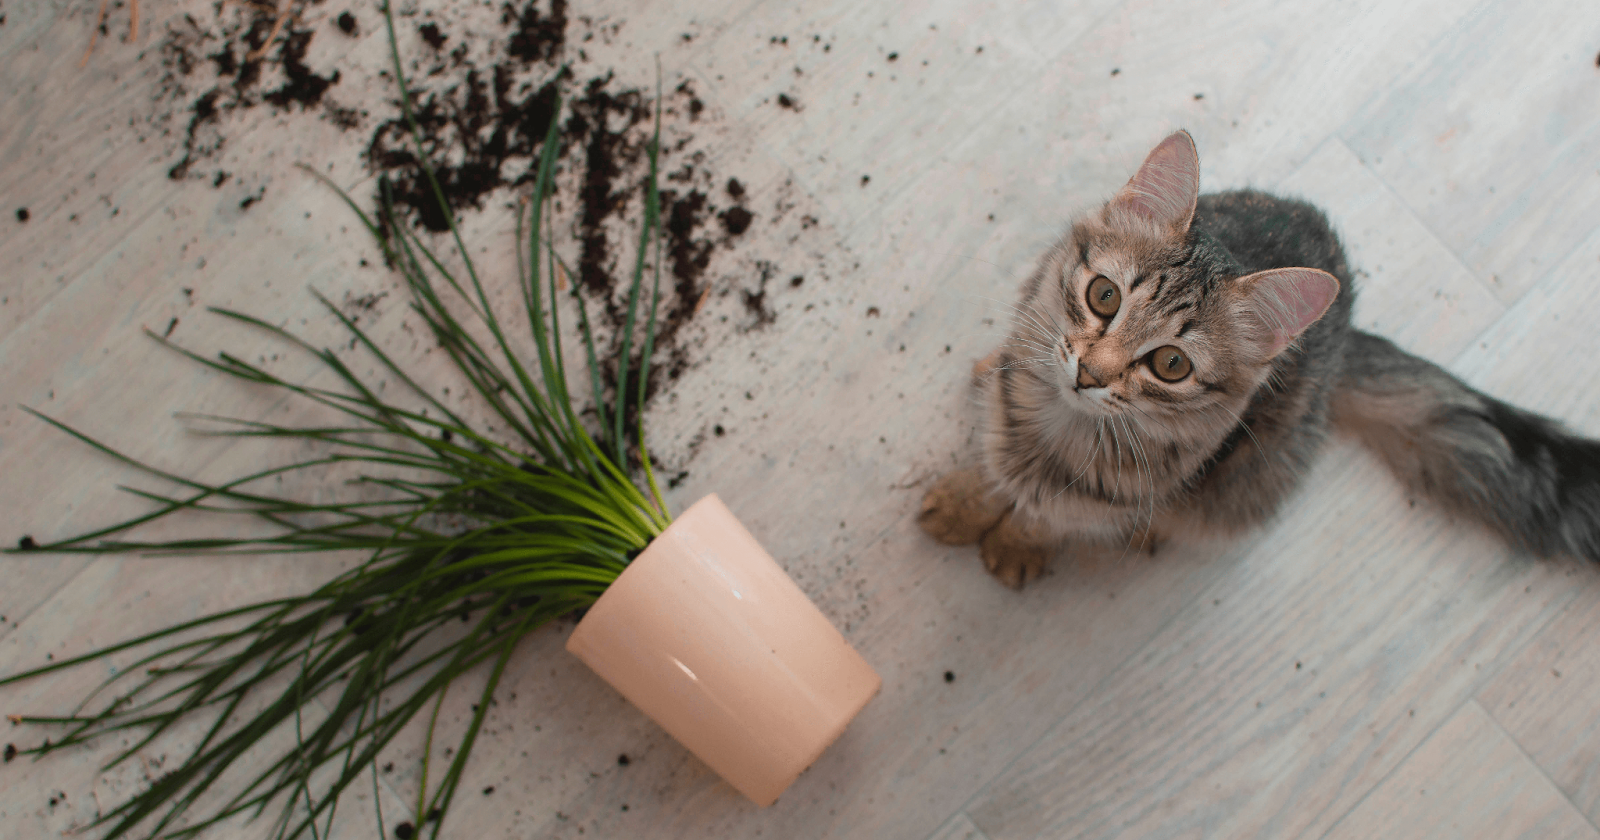 Cat sitting next to tipped over potted plant